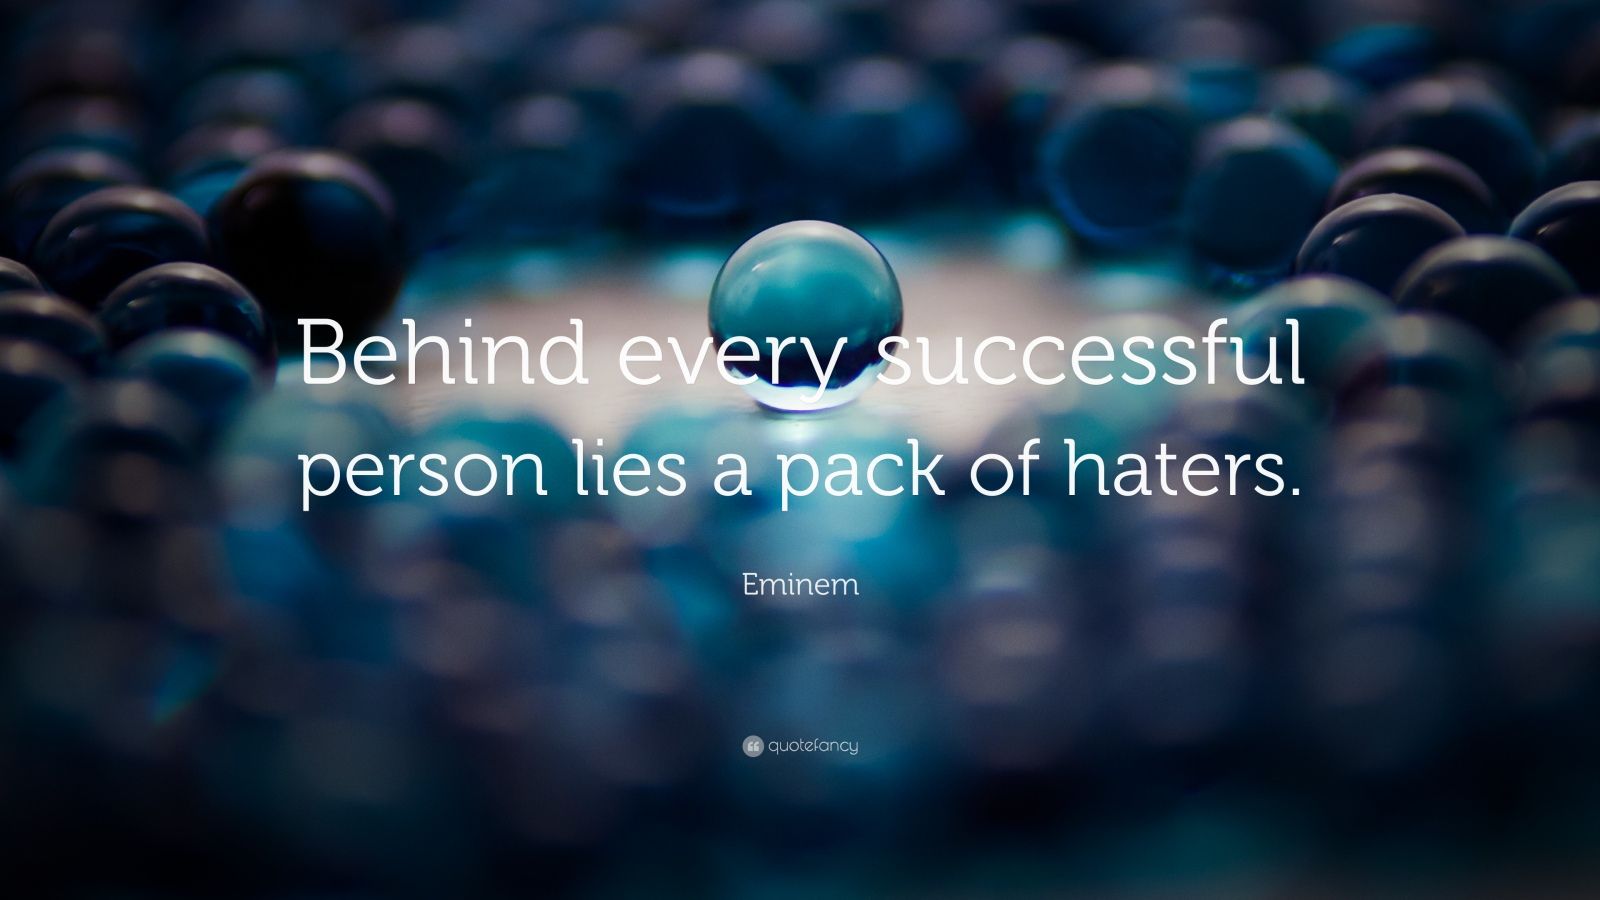 Eminem Quote “Behind every successful person lies a pack of haters ”